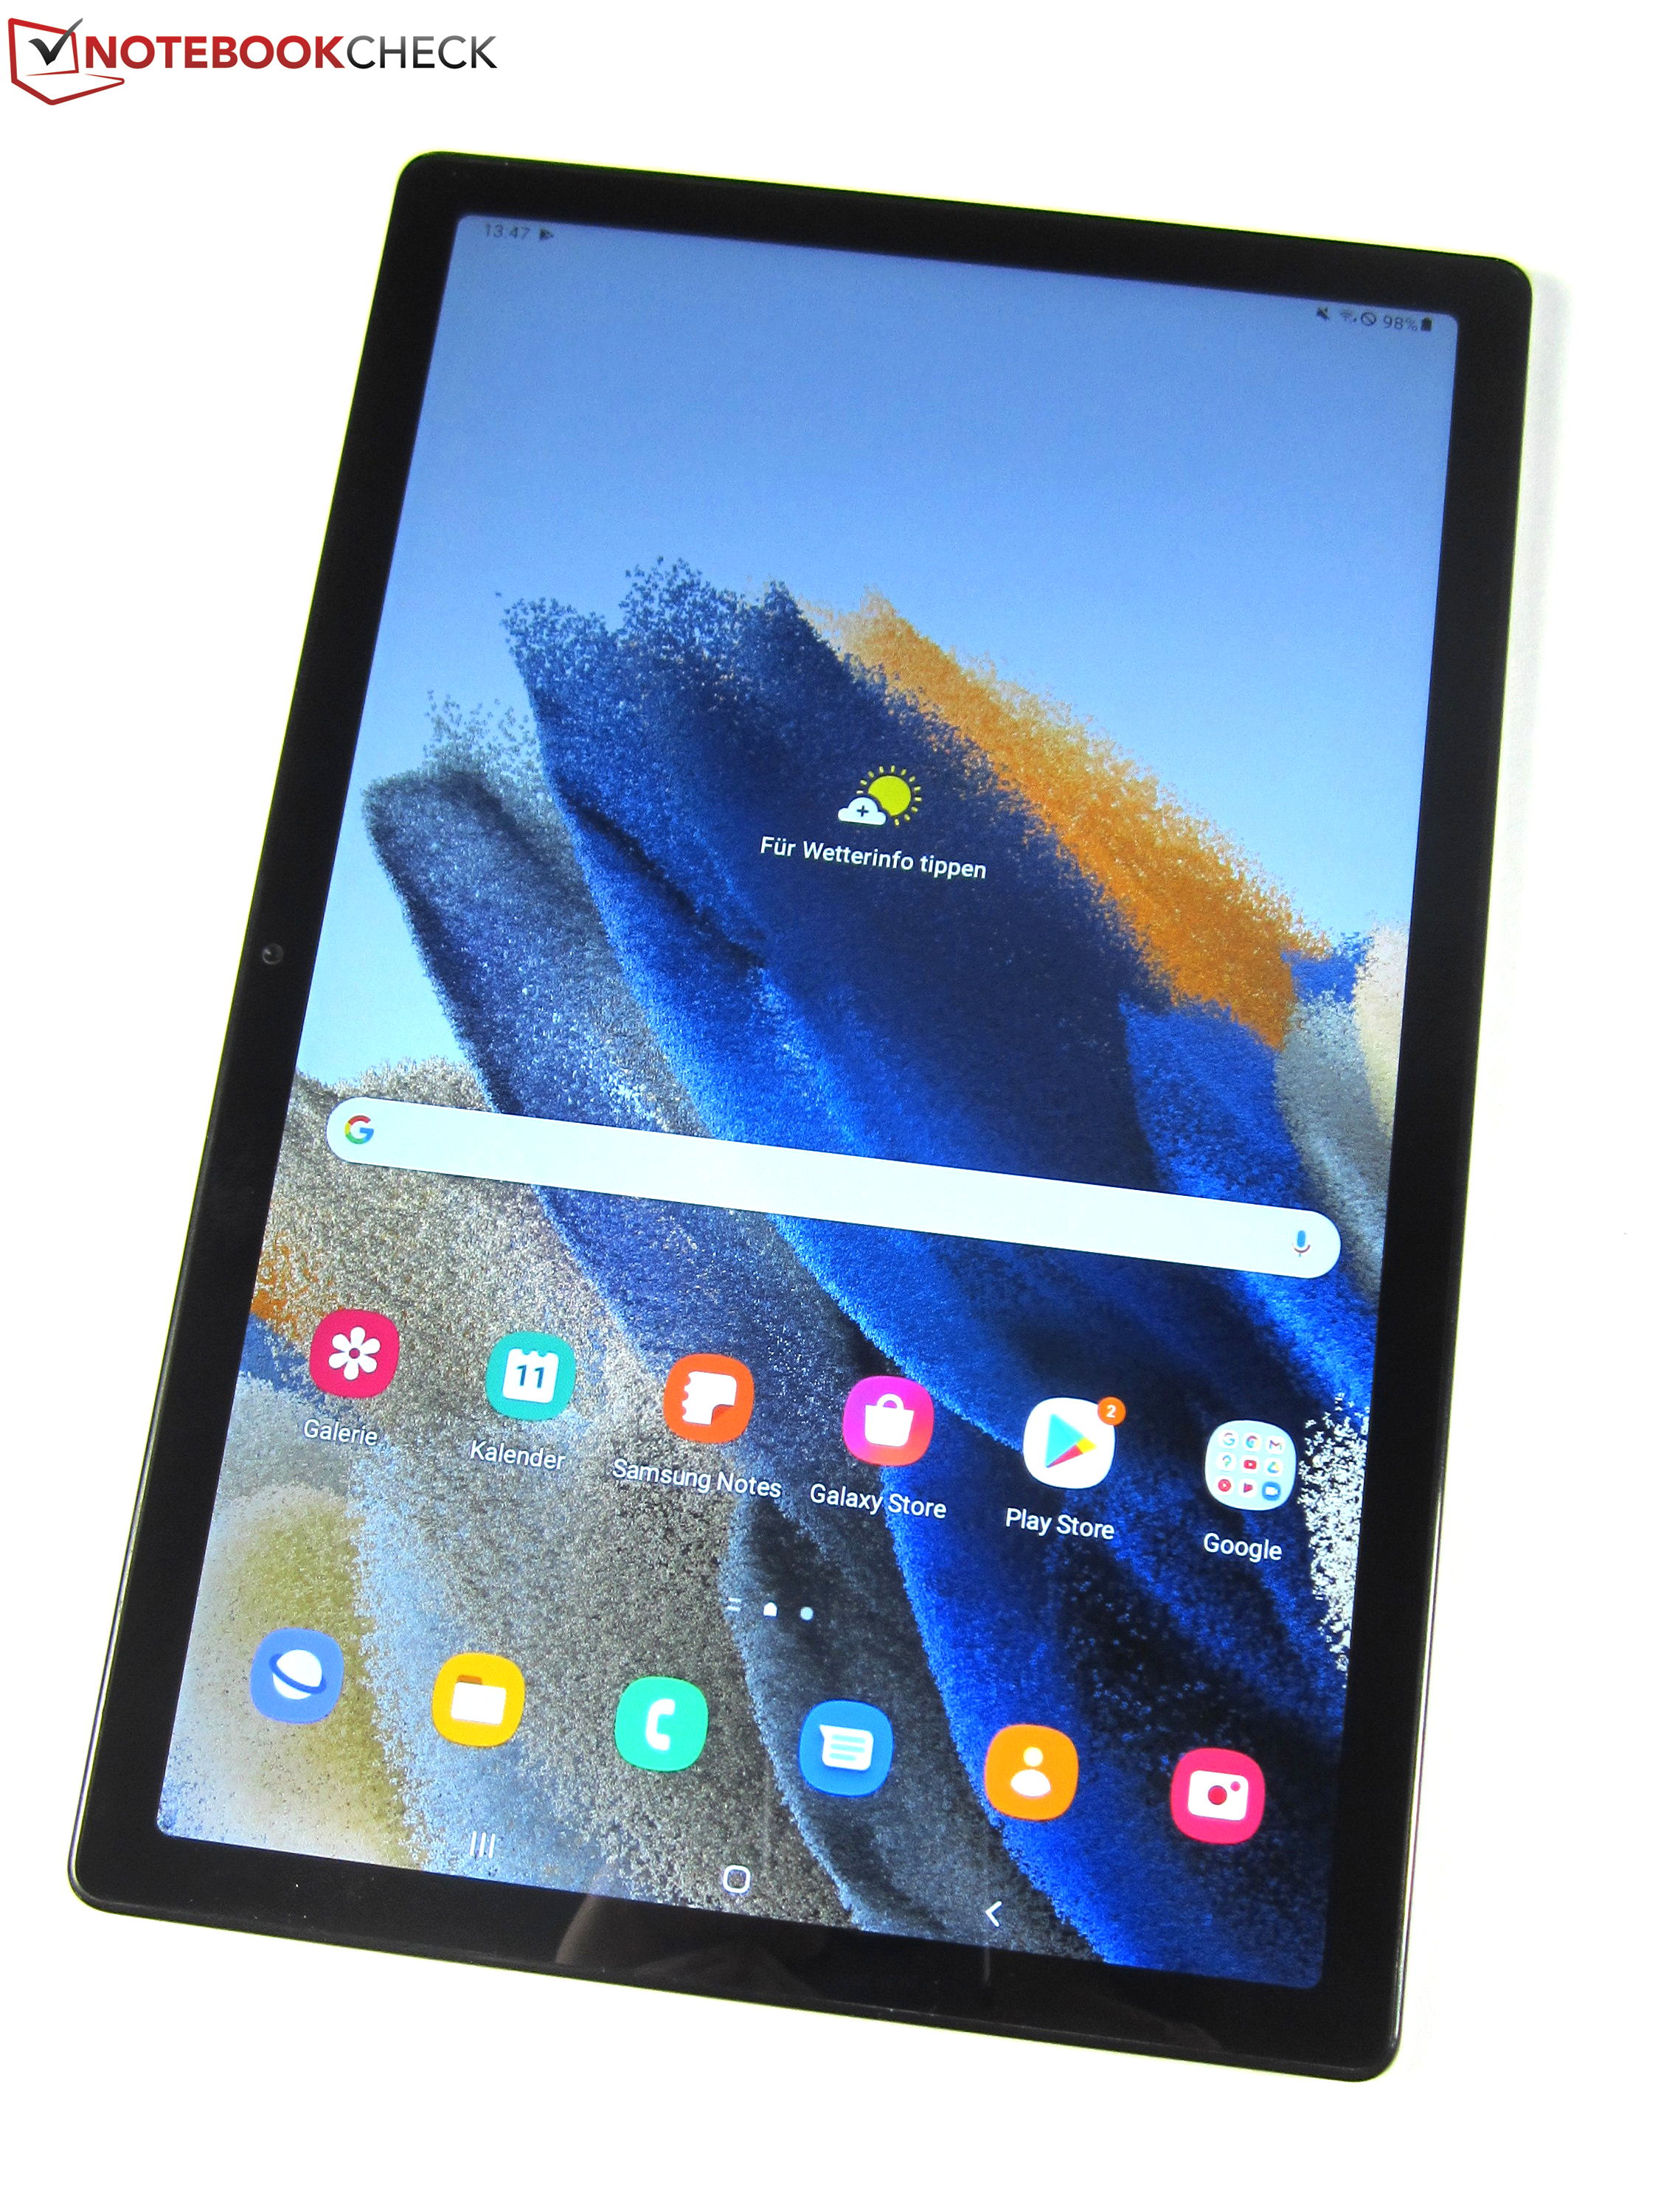 Samsung Galaxy Tab A8 - The new edition of the affordable mid-range tablet  -  News